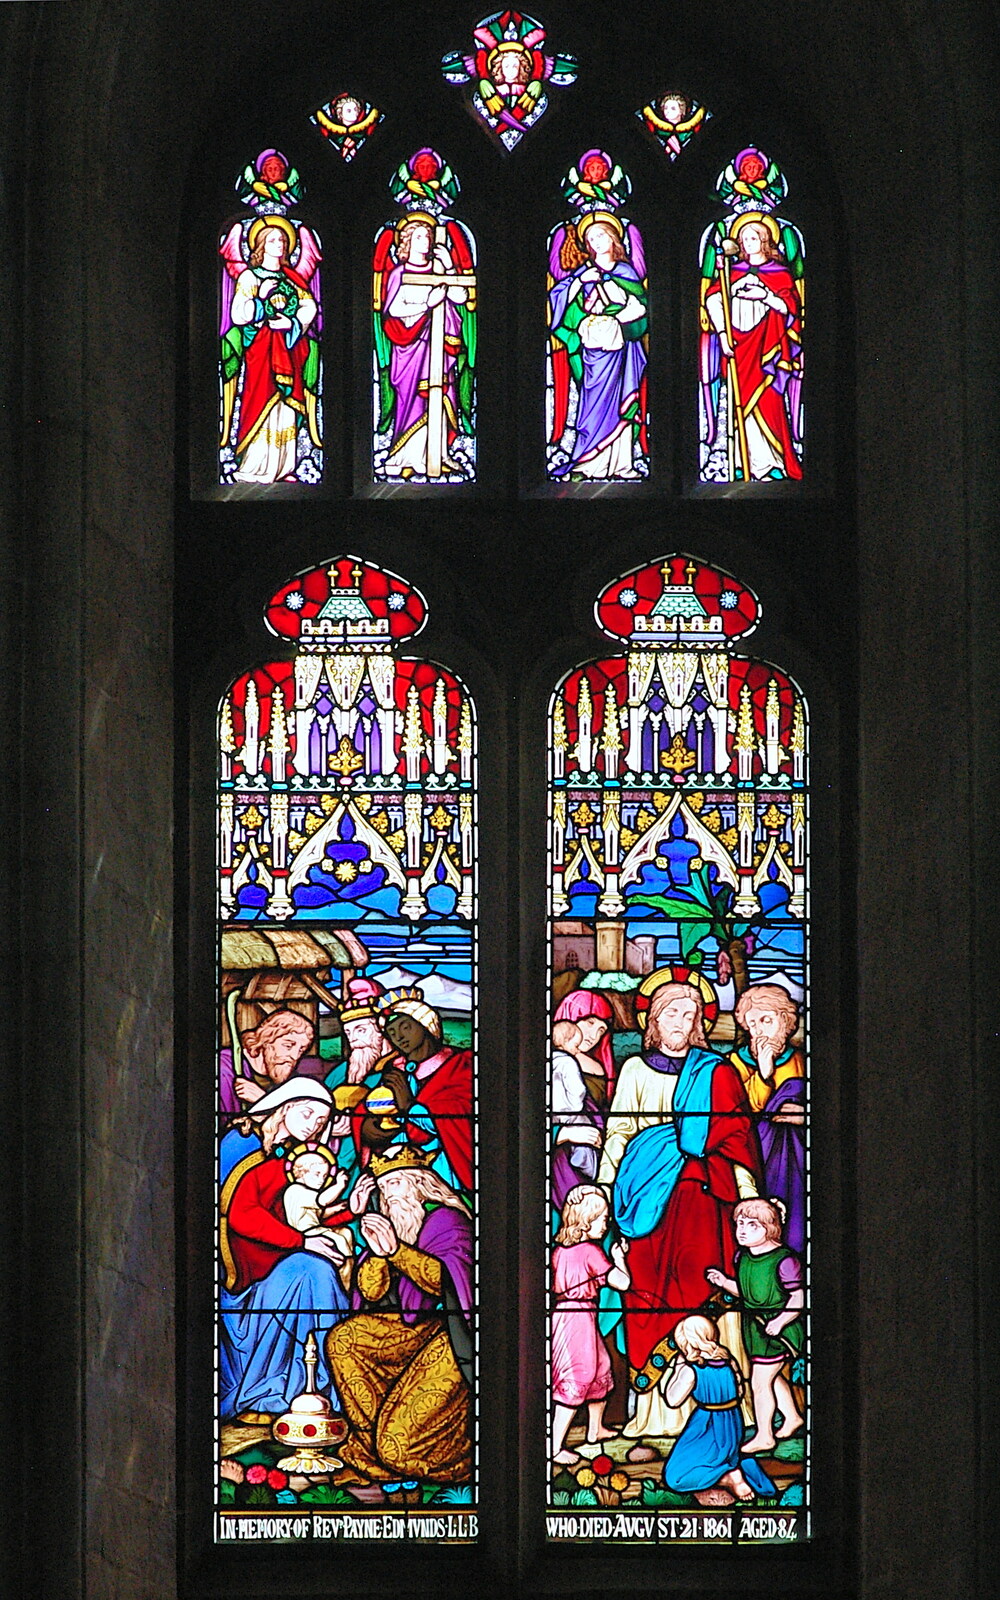 Stained-glass windows from Peterborough Cathedral, Cambridgeshire - 7th September 2005